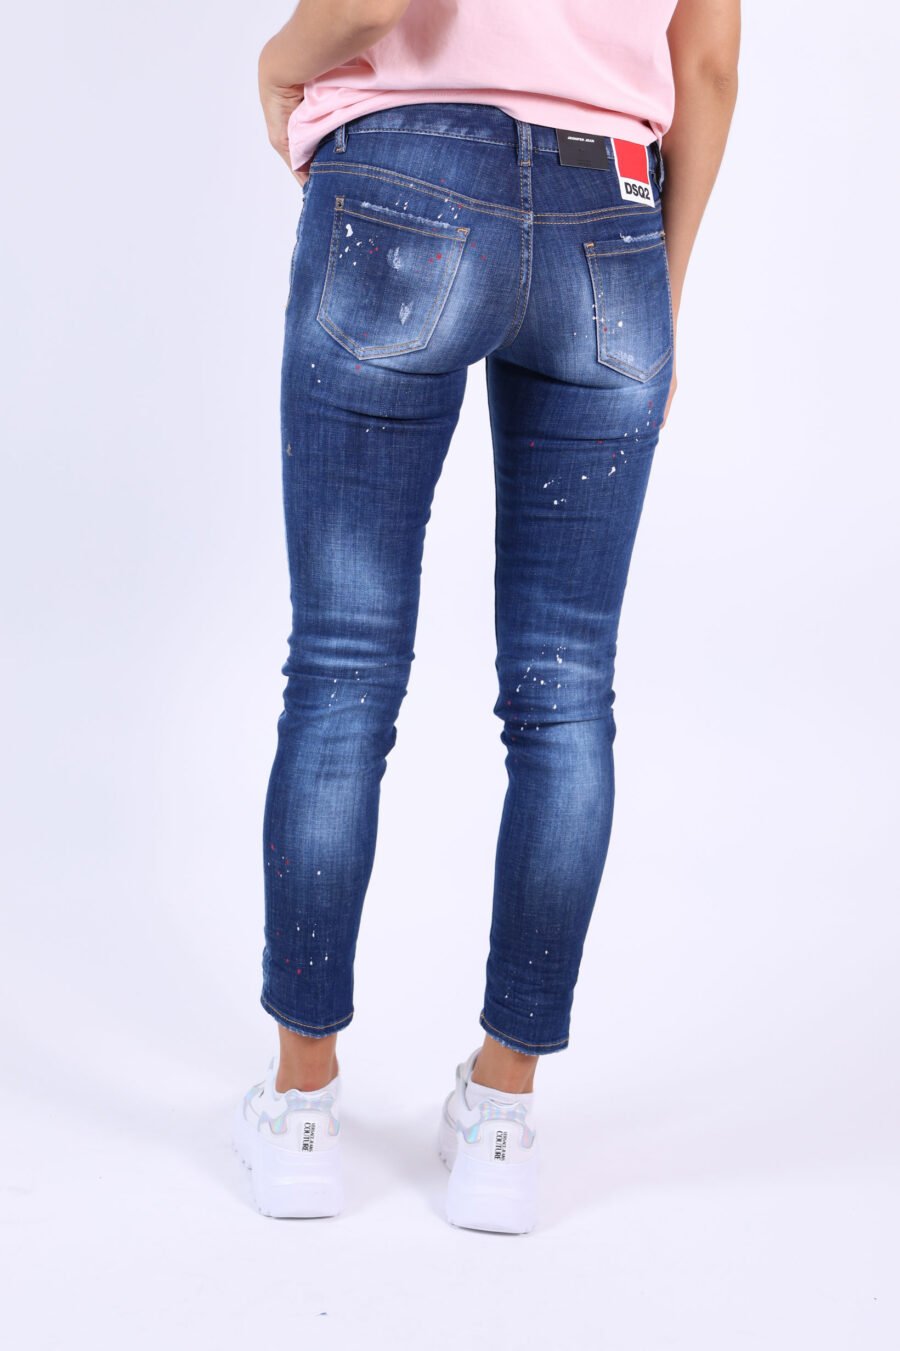 Jeans "Jennifer Jean" blue with splash paint and faded effect - 361223054662201902